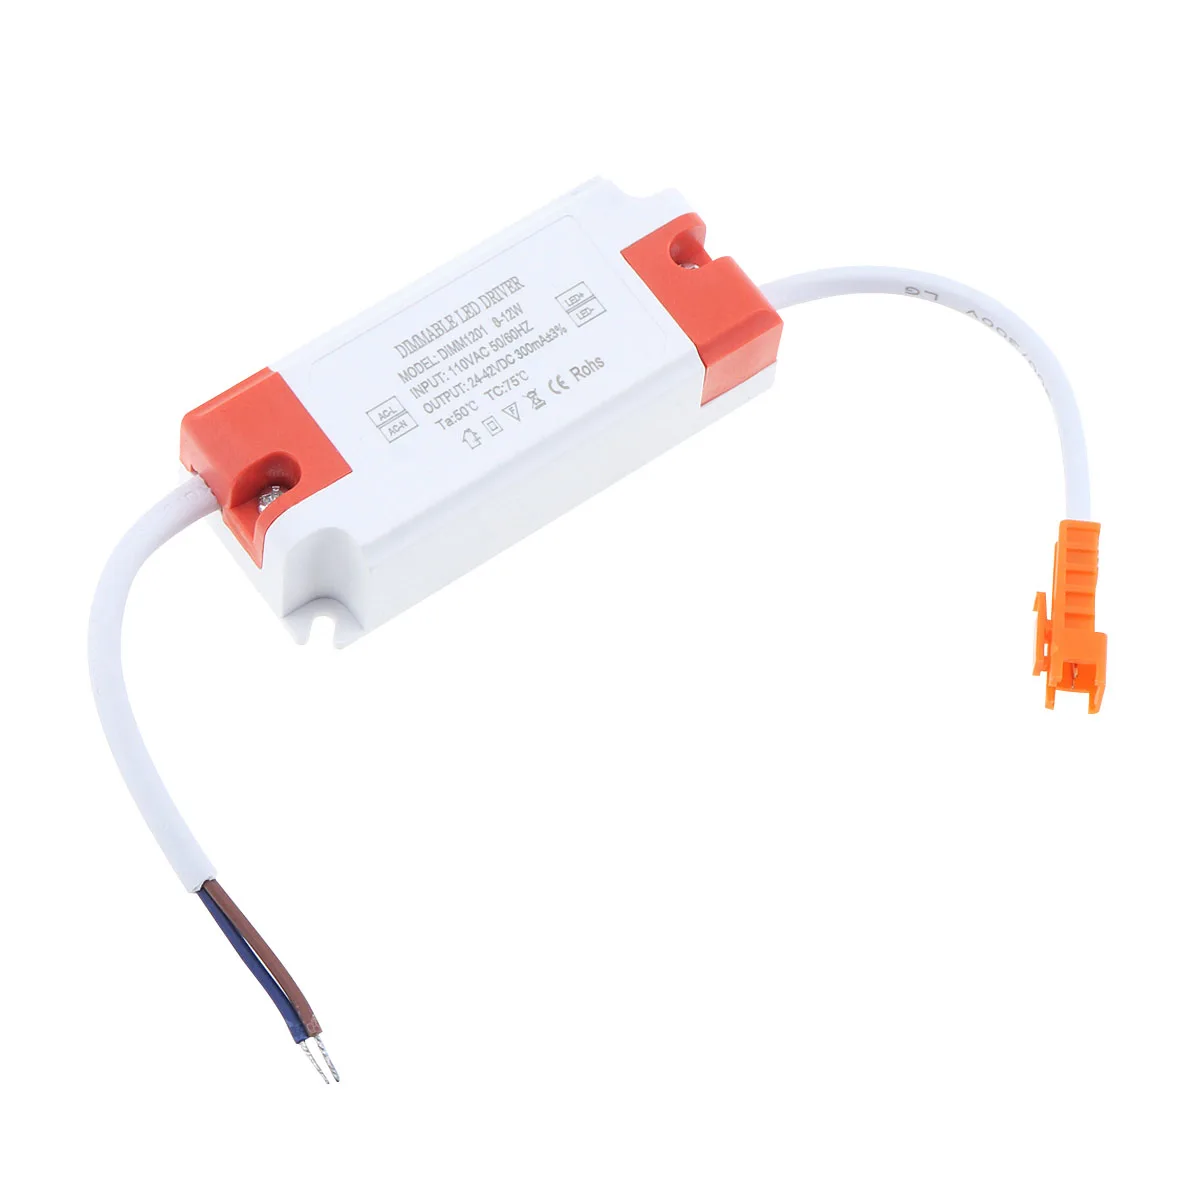 

3-24W LED Dimmable Driver 85-145V Low Voltage Dimmable Step Down Transformer SCR Power Supply Module for Constant Led Products